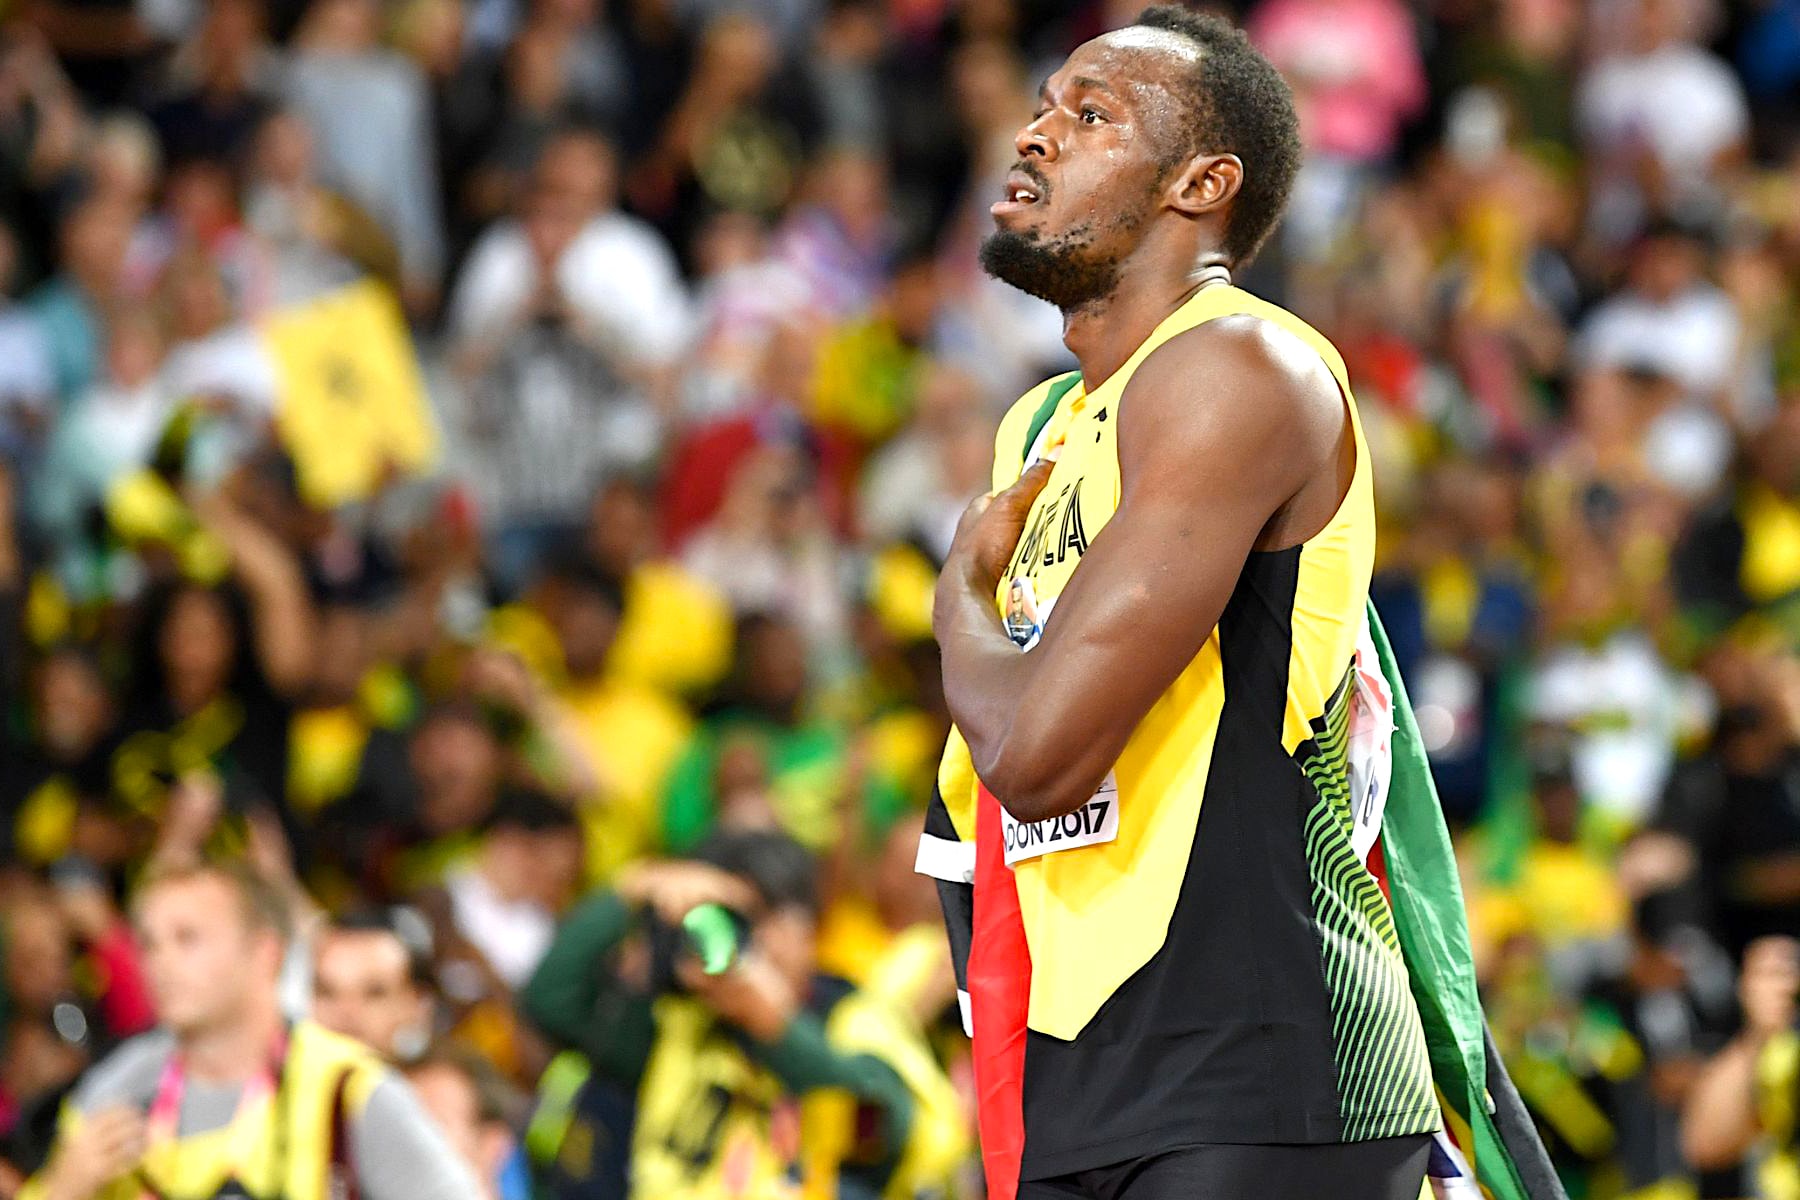 Usain Bolt Lost His Last 100 Meter Race